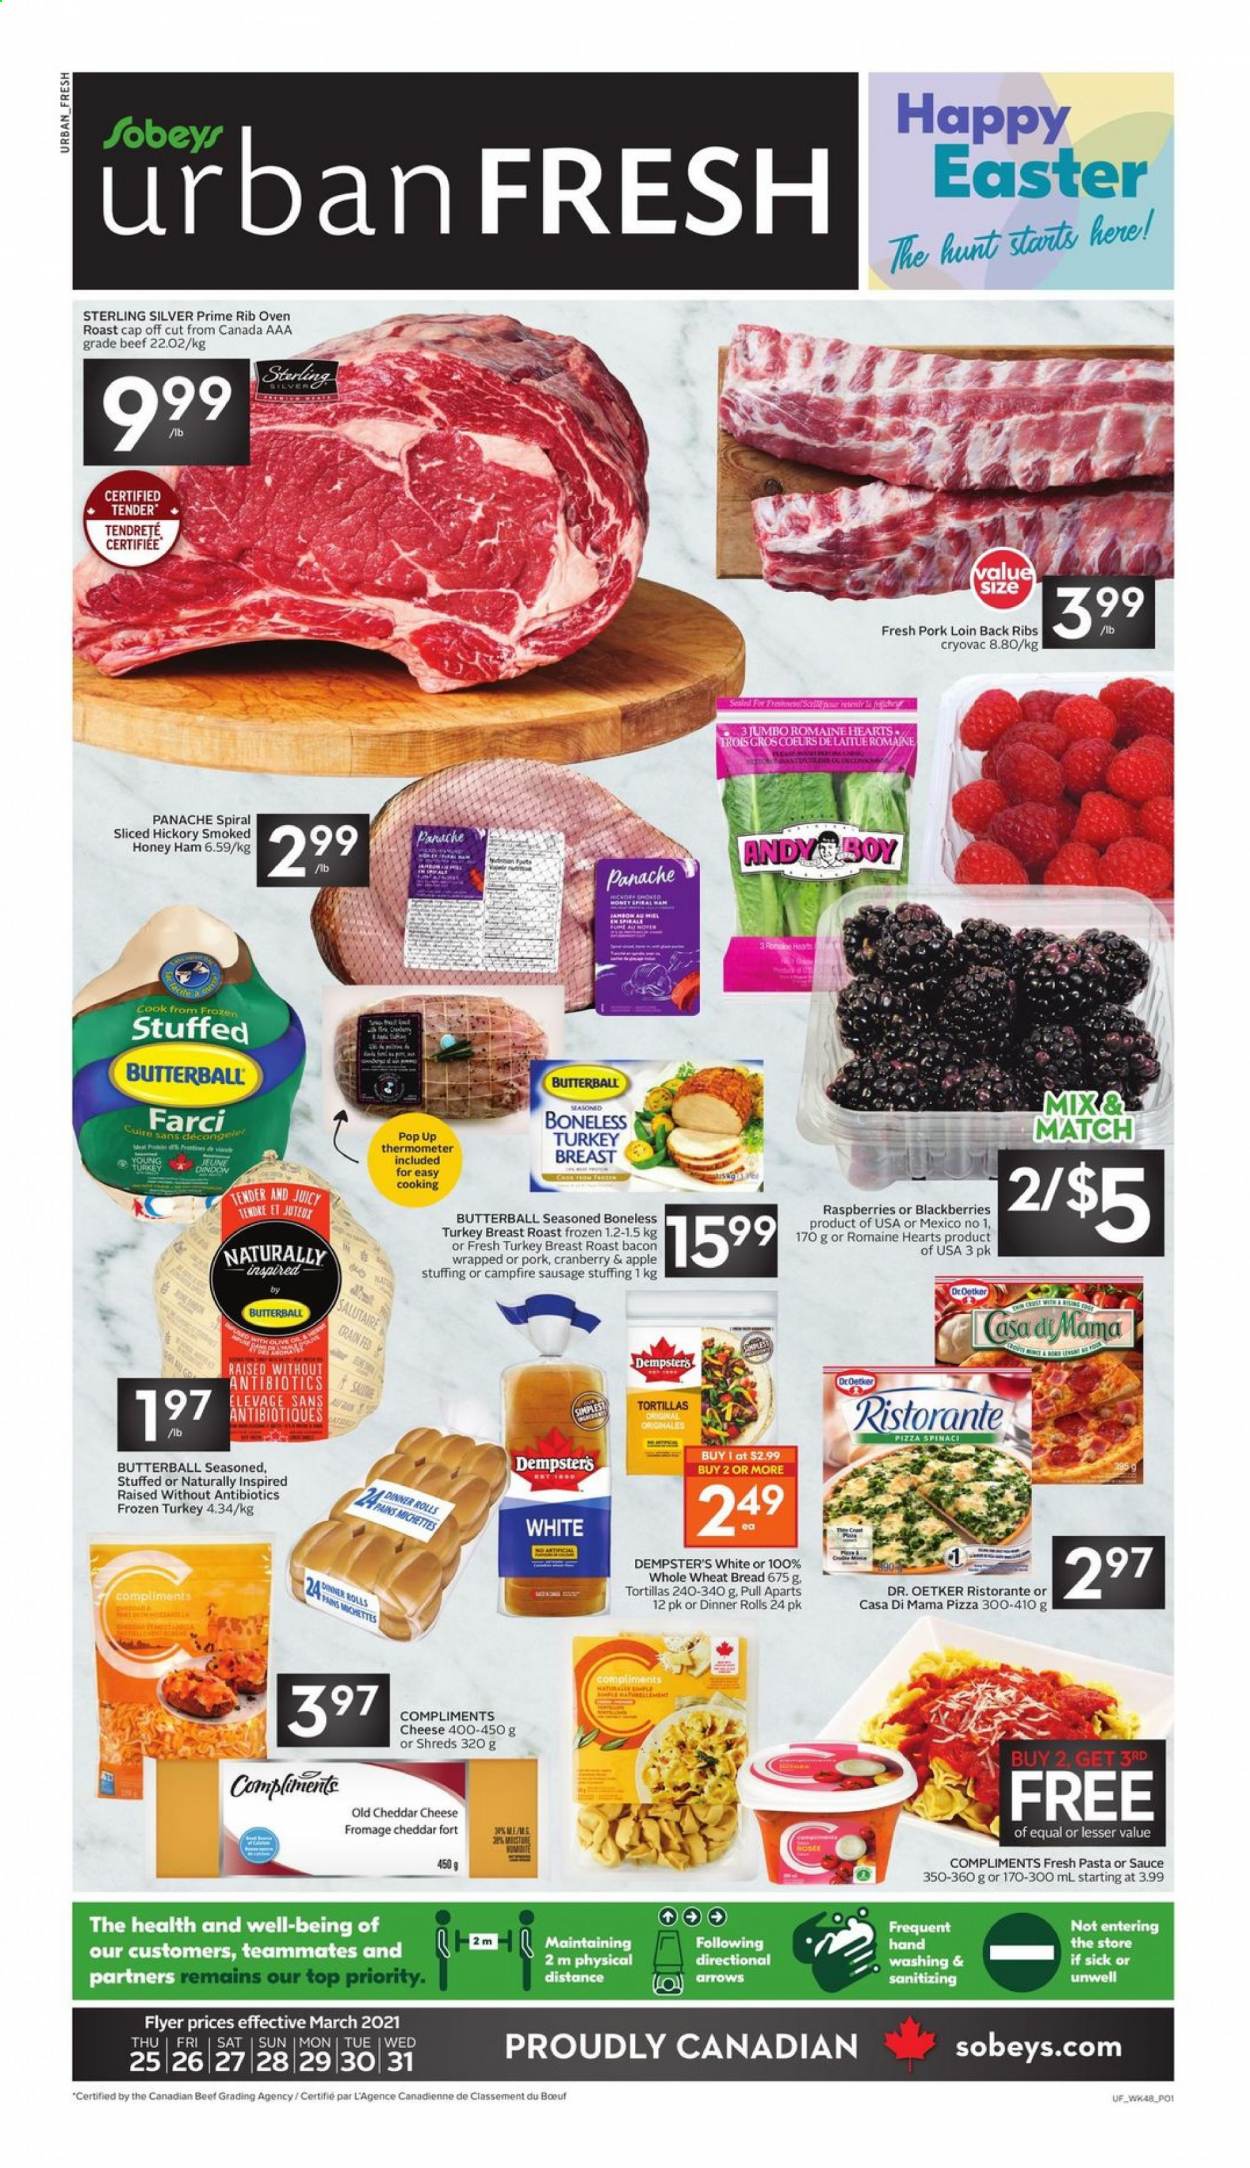 thumbnail - Sobeys Urban Fresh Flyer - March 25, 2021 - March 31, 2021 - Sales products - tortillas, wheat bread, dinner rolls, blackberries, pizza, bacon, Butterball, ham, sausage, cheddar, Dr. Oetker, turkey breast, whole turkey, turkey, pork loin, pork meat, nappies, thermometer. Page 1.